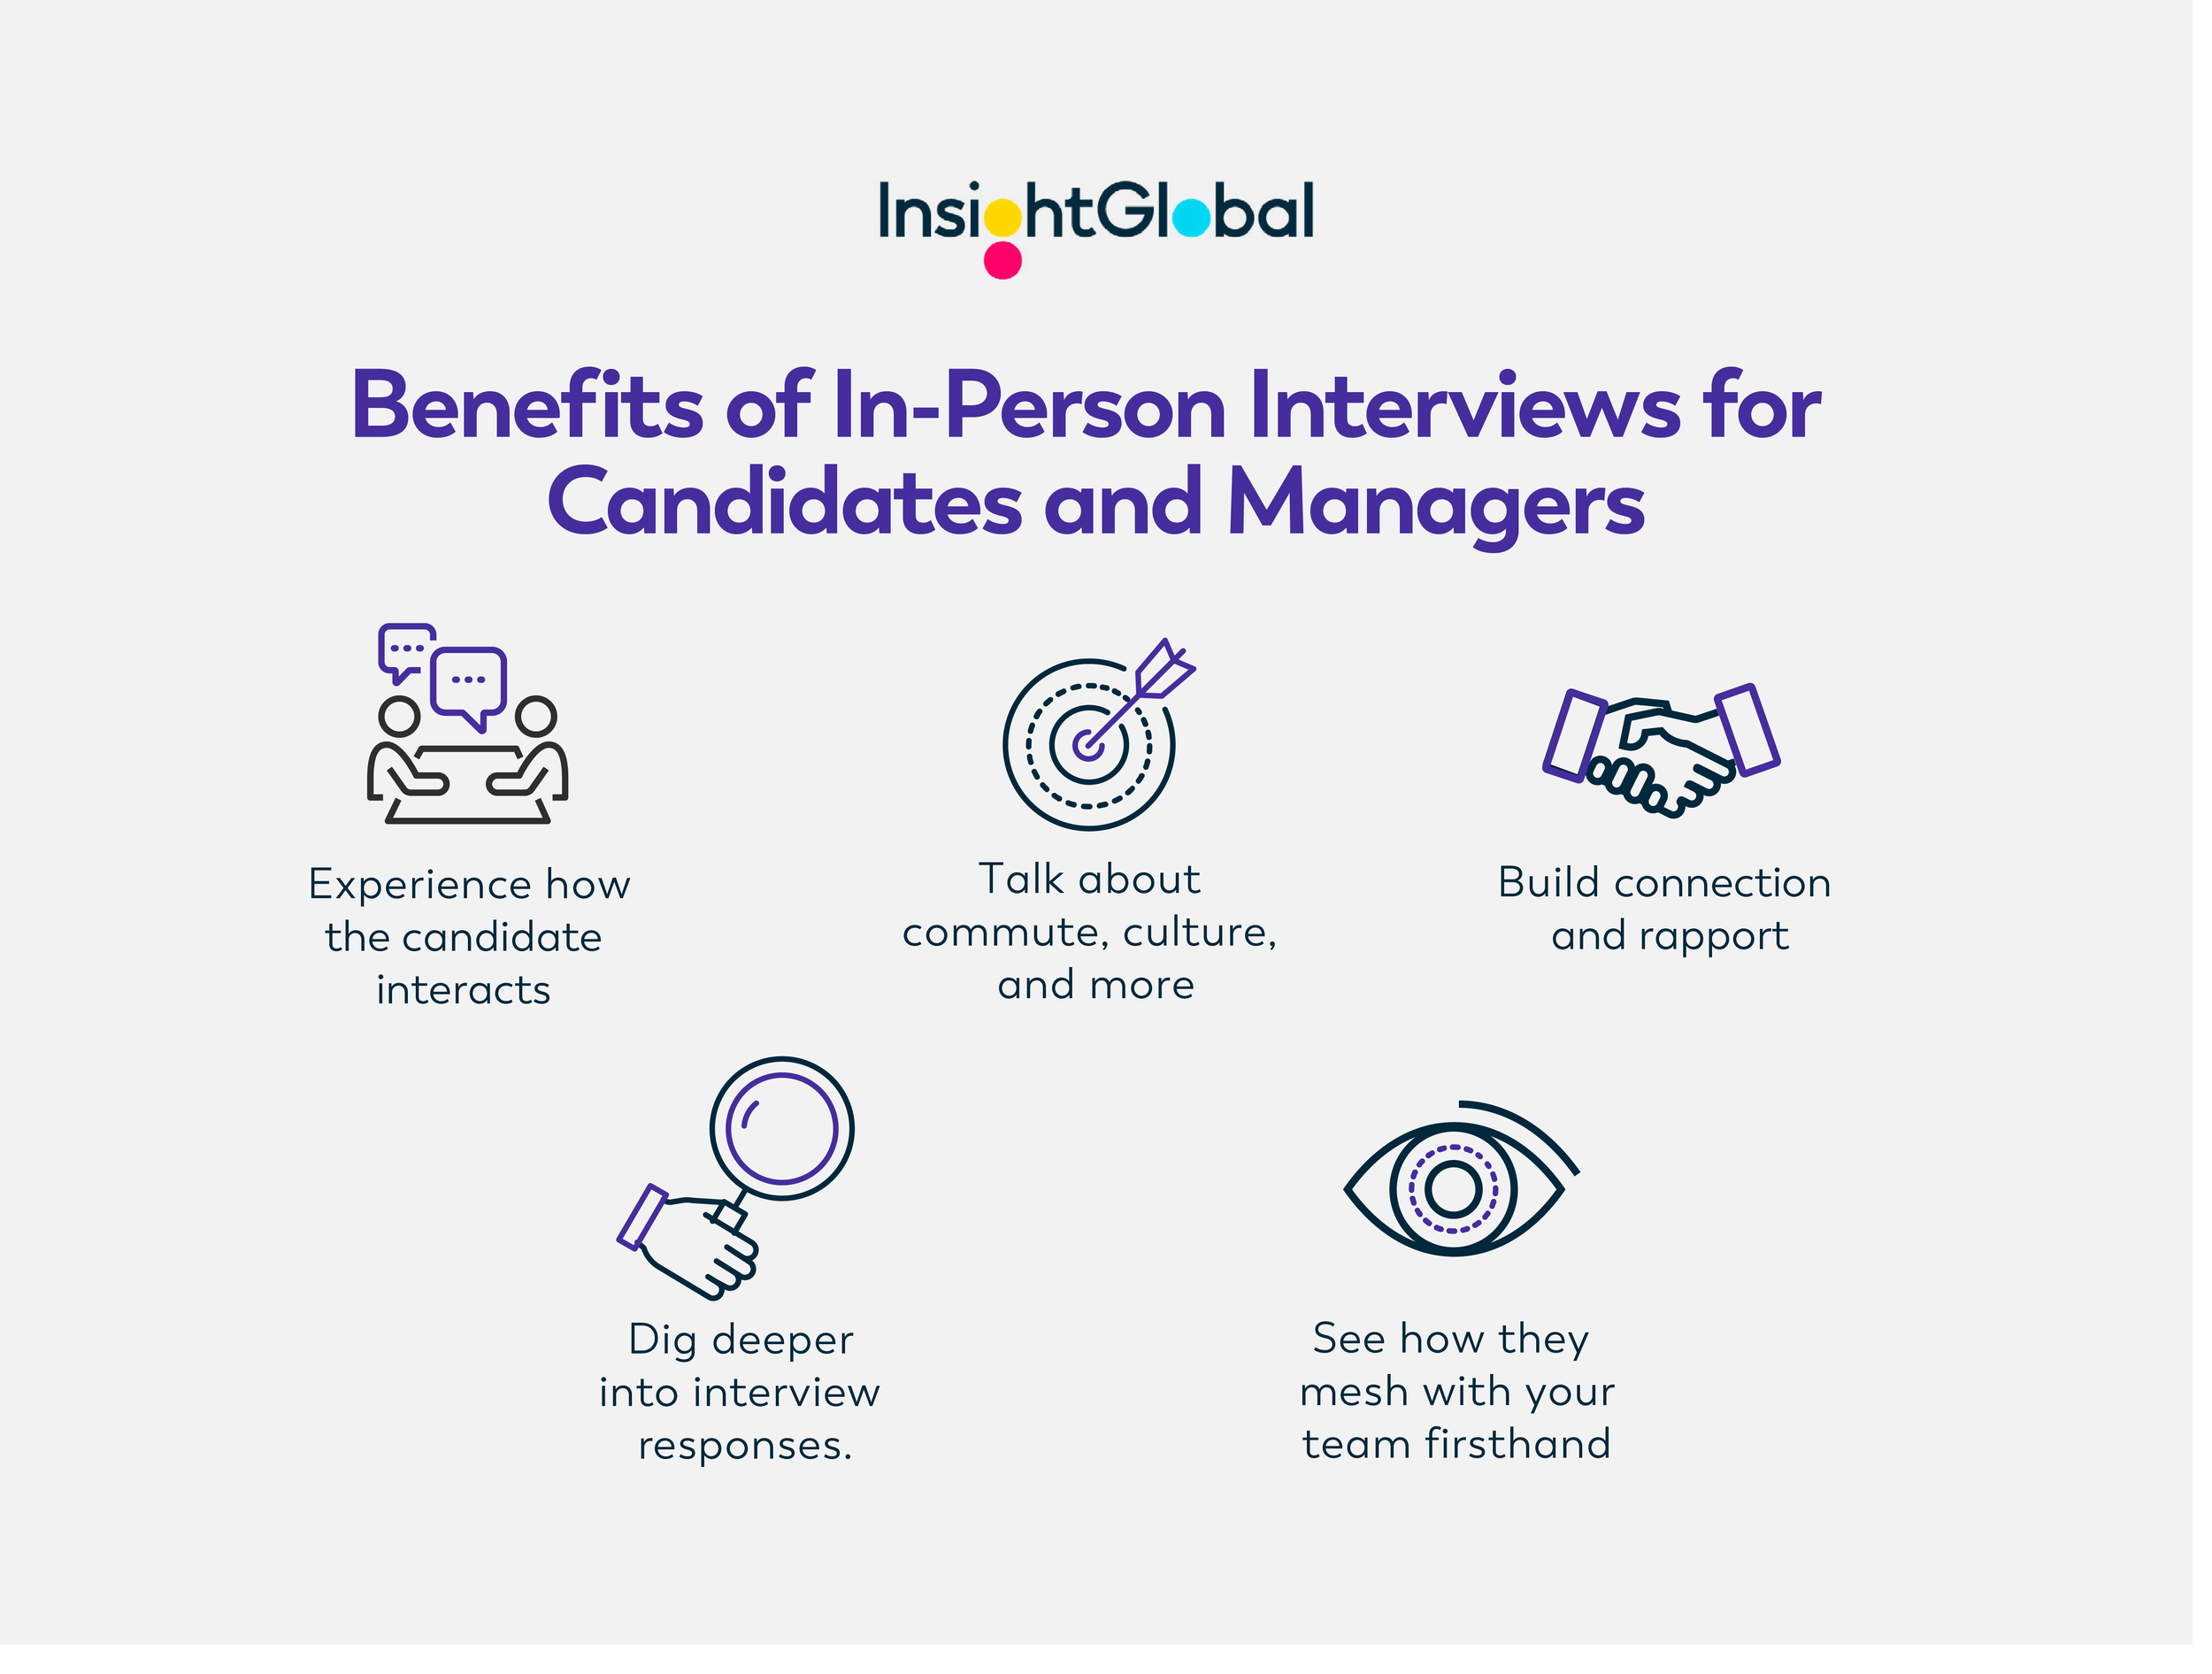 IG23-5xBlog-5 Benefits of In-Person Interviews_Final.png